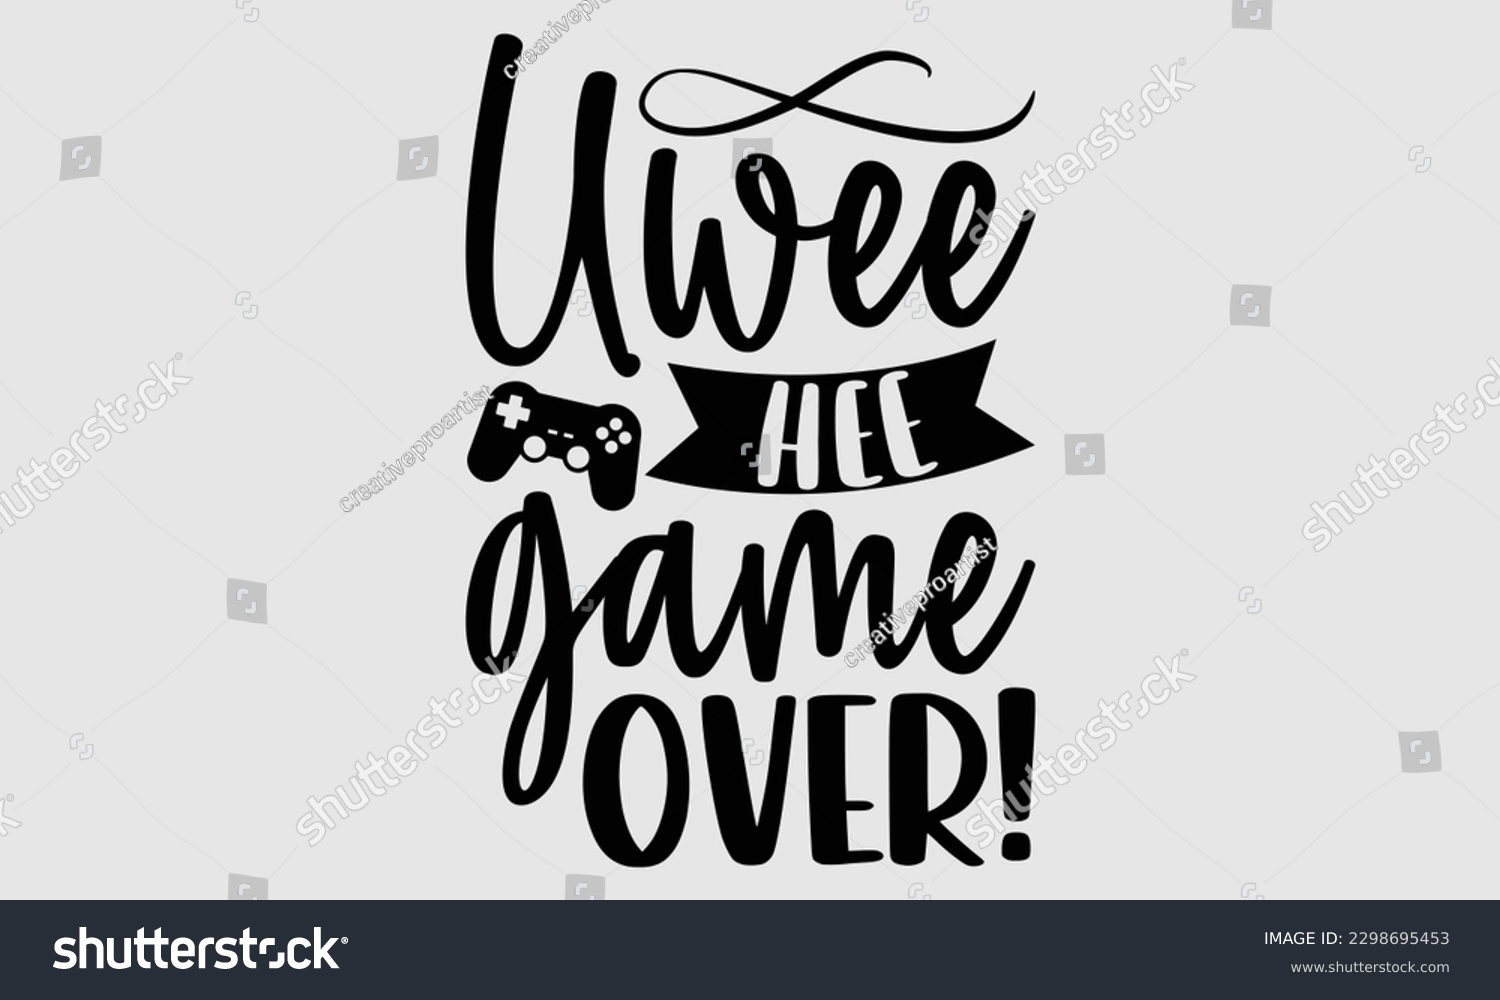 SVG of Uwee hee  game over!- Octopus SVG and t- shirt design, Hand drawn lettering phrase for Cutting Machine, Silhouette Cameo, Cricut, greeting card template with typography white background, EPS svg